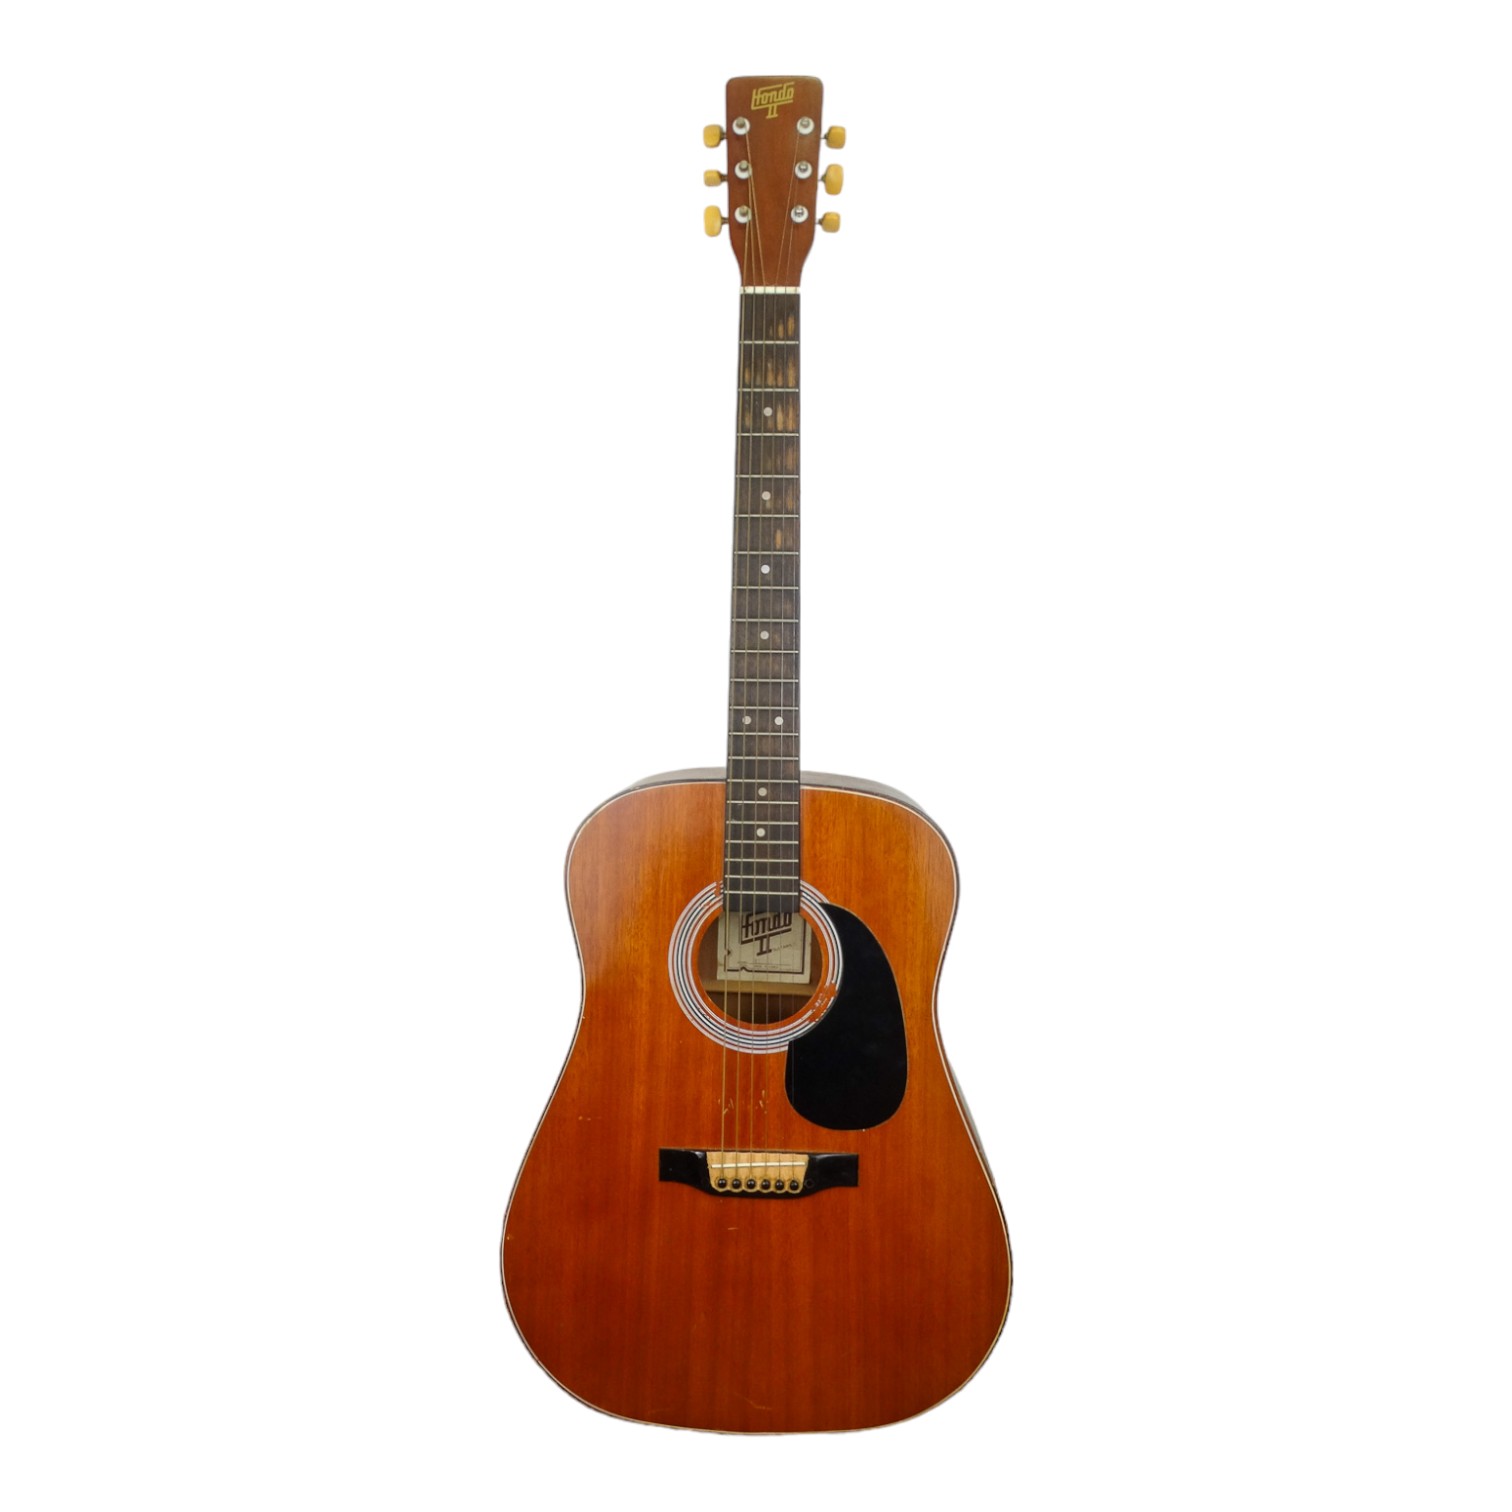 A Hondo II acoustic guitar - with soft case.